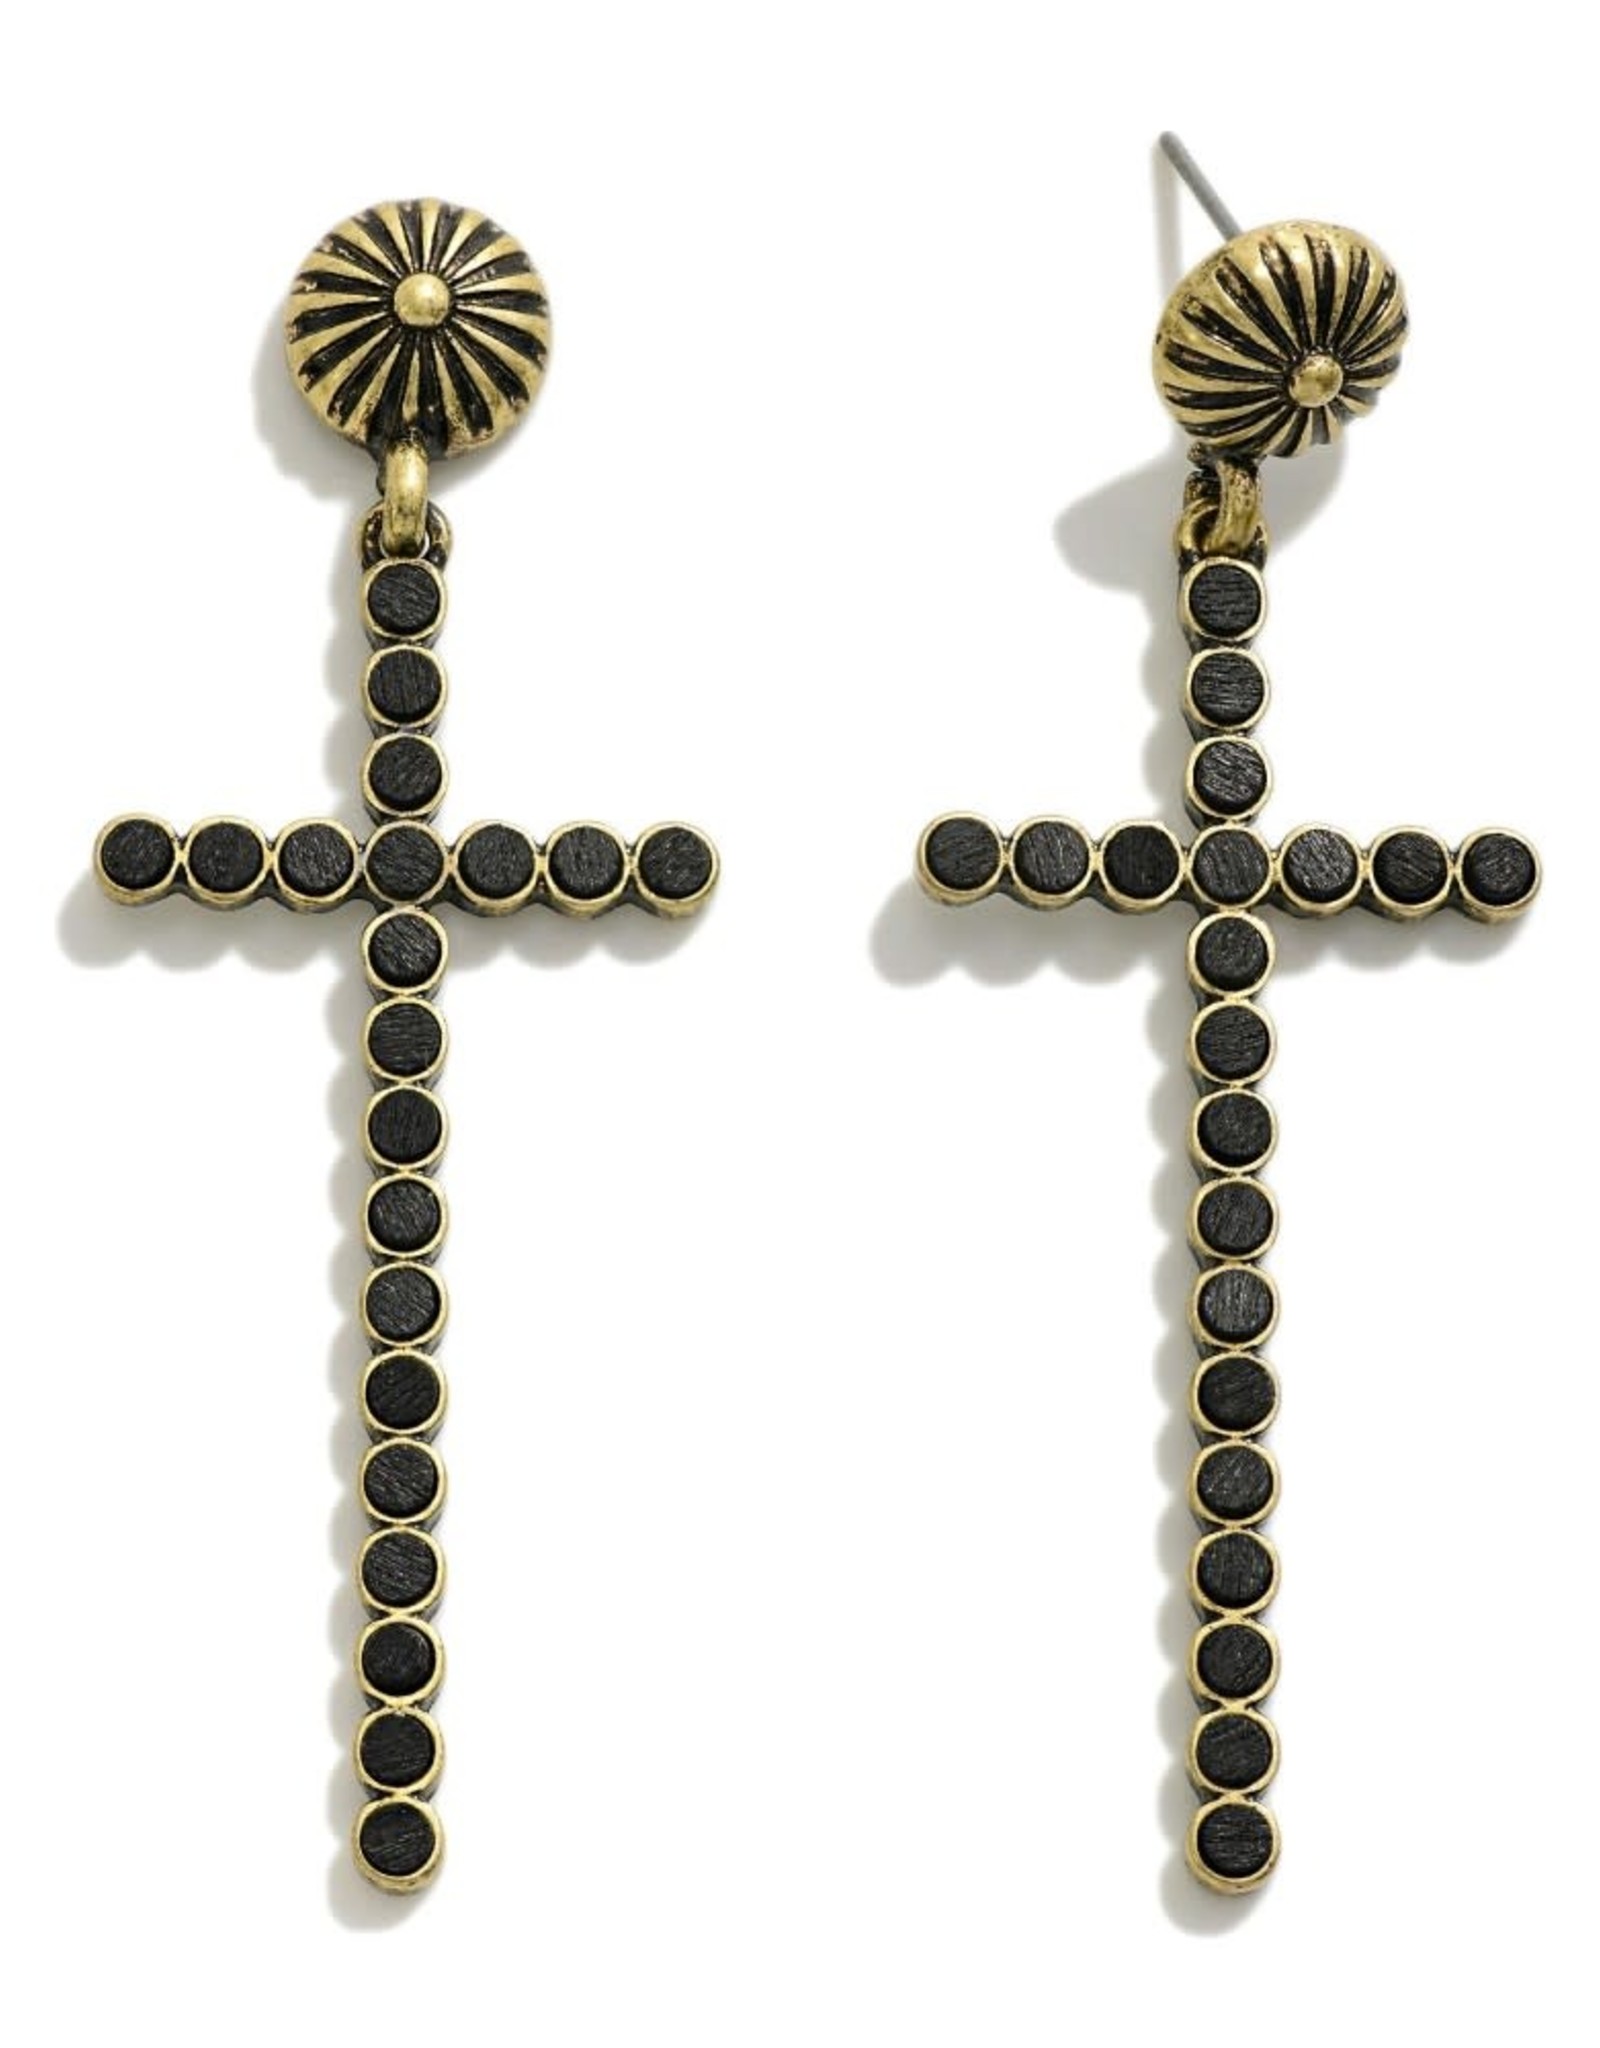 judson 262193 - Cross Drop Earrings With Wooden Stud Inlays 2.5"L - Black